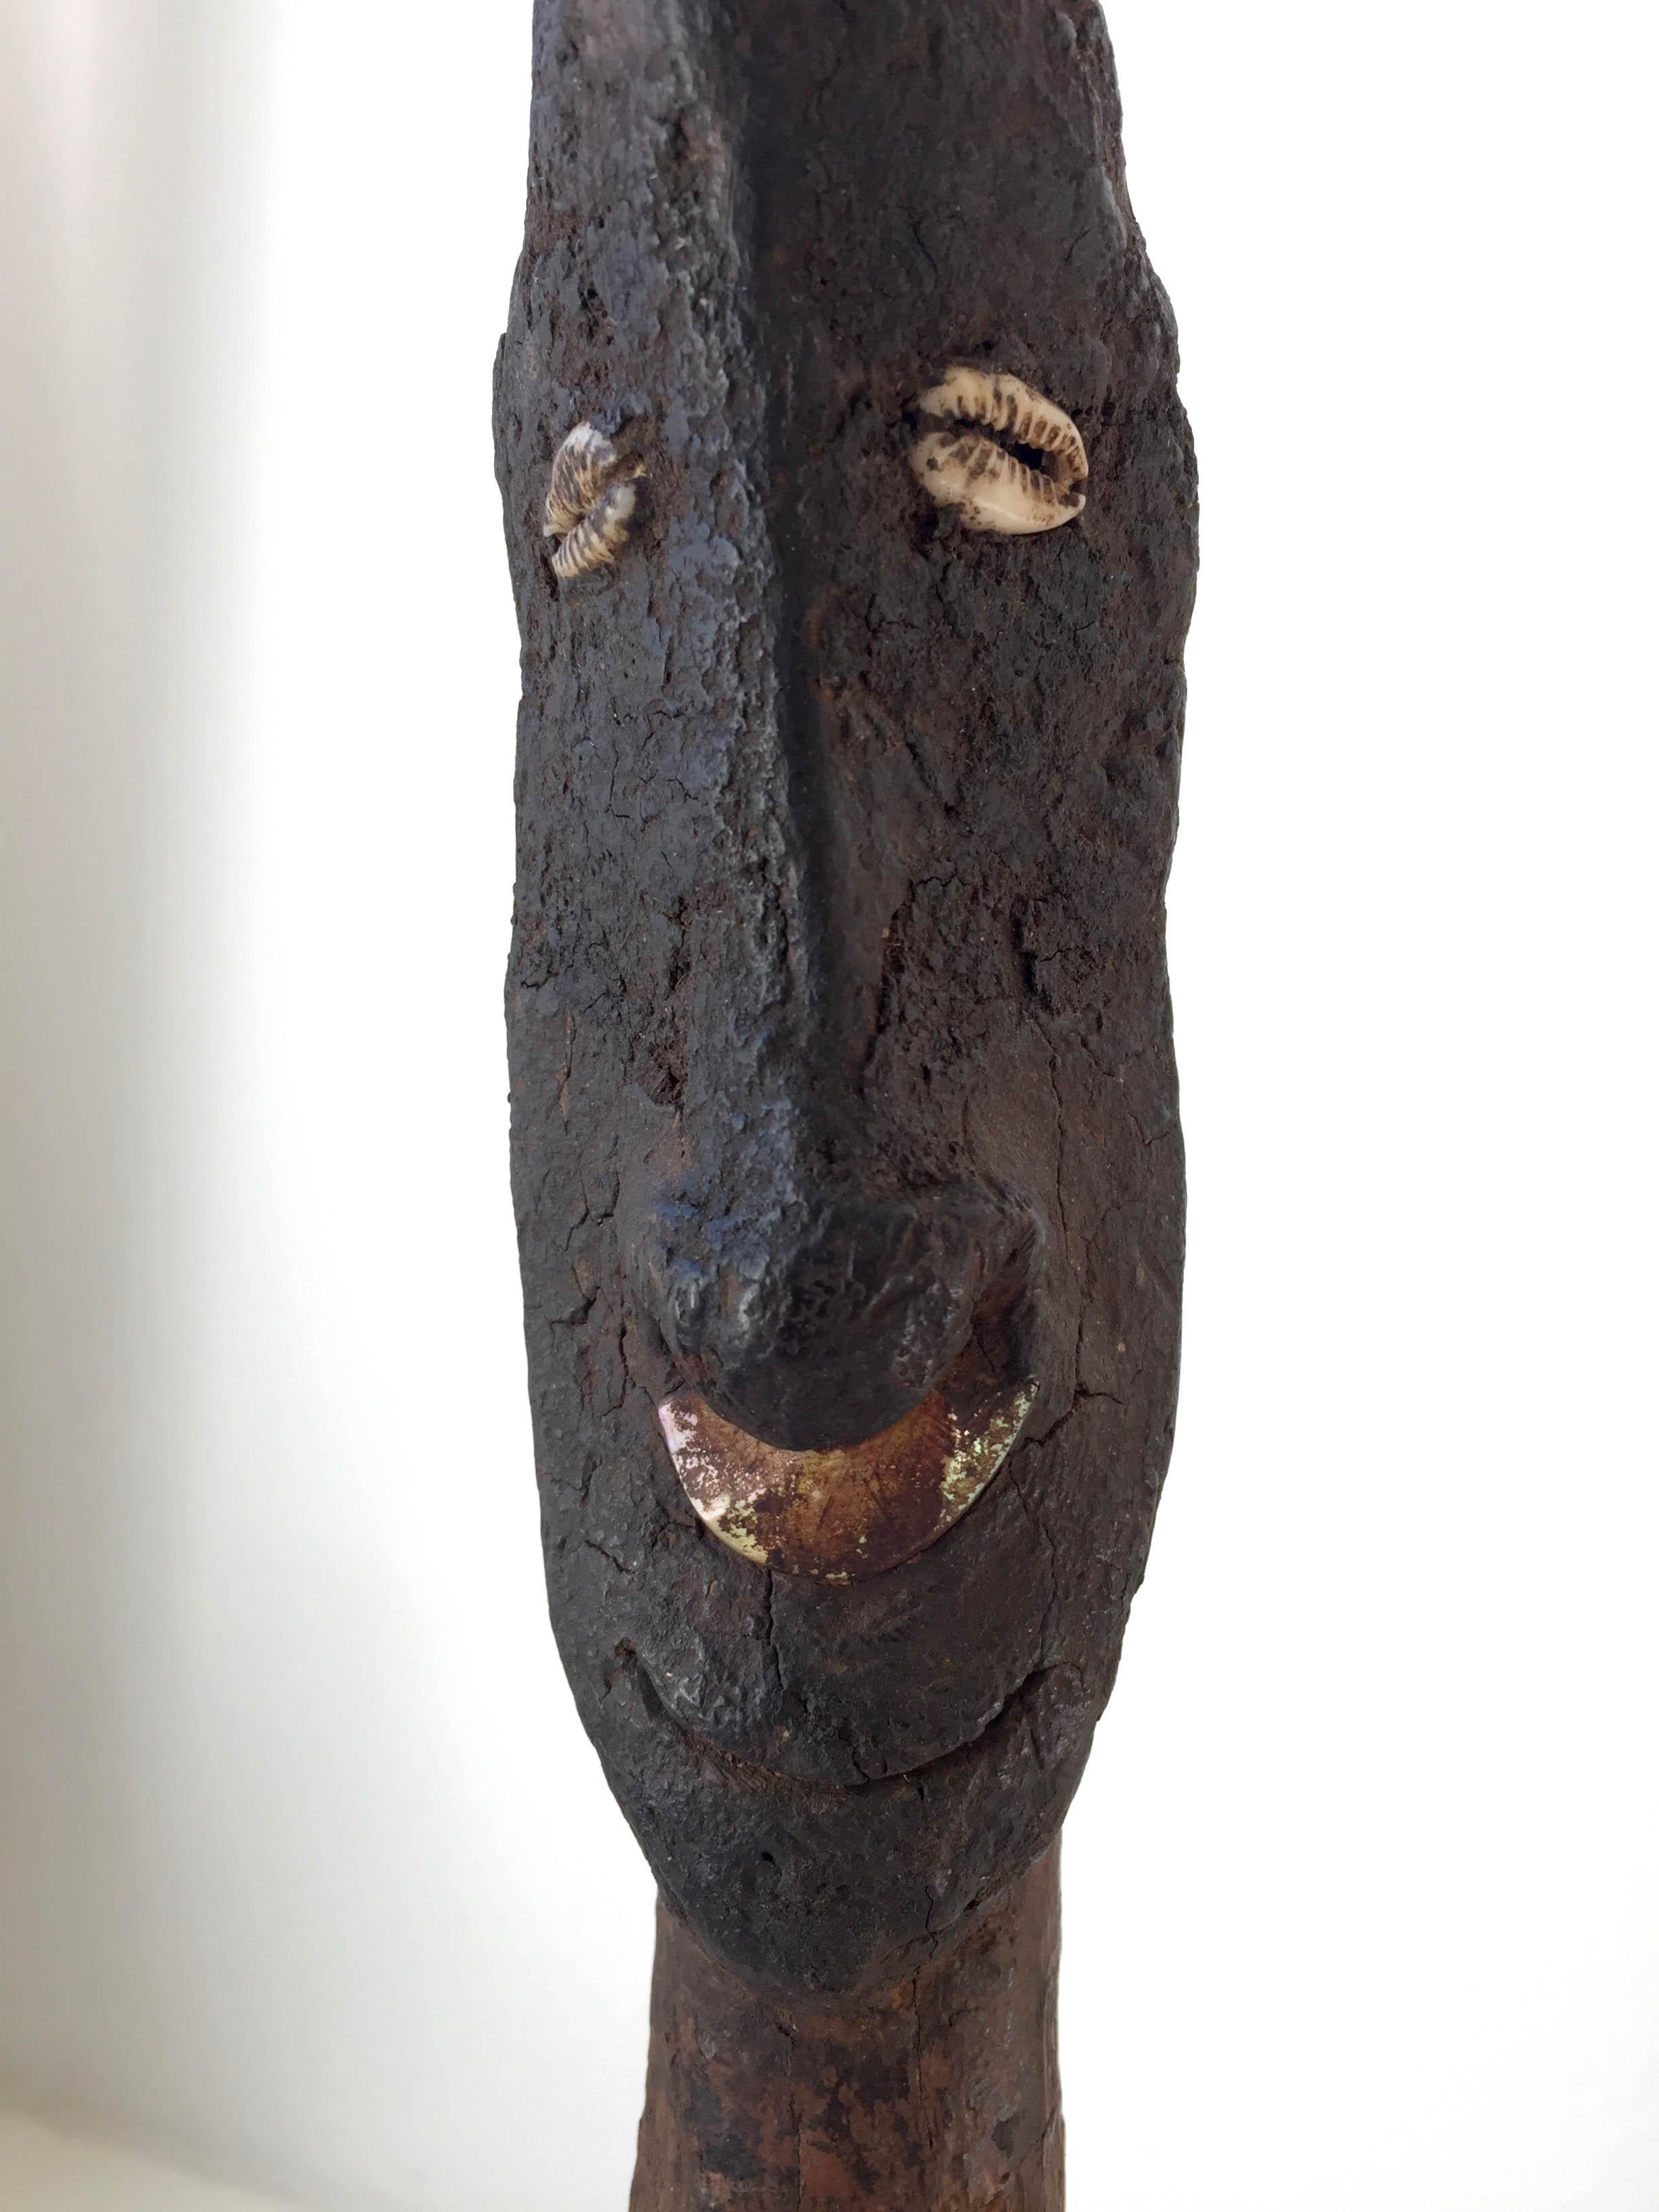 A very old and beautifully encrusted stopper. This intriguing and expressive Middle Sepik area stopper comes from the John Friede Collection. Featuring a stylized anthropomorphic face of an ancestral totem figure with cowry shell eyes and shell nose